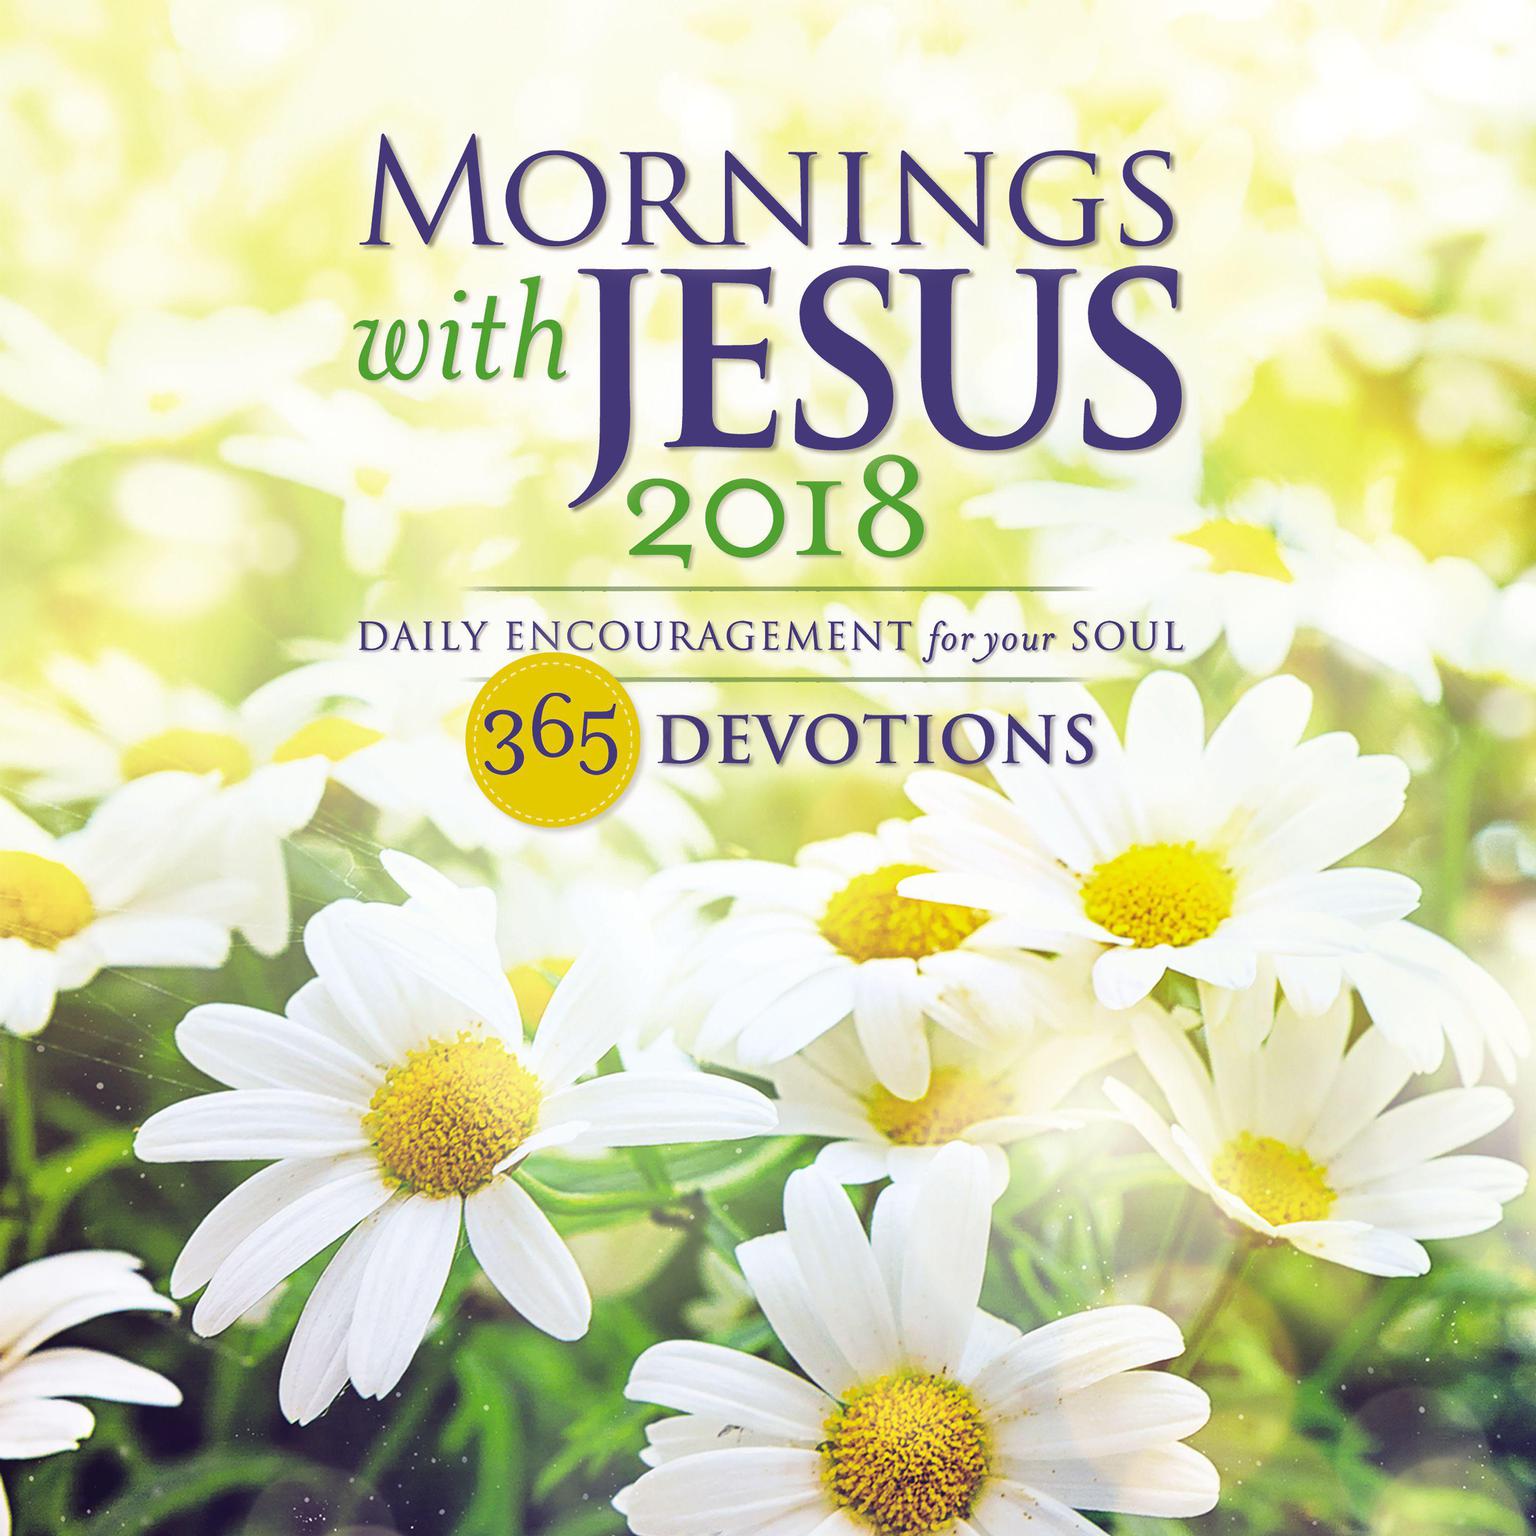 Mornings with Jesus 2018: Daily Encouragement for Your Soul Audiobook, by Guideposts 